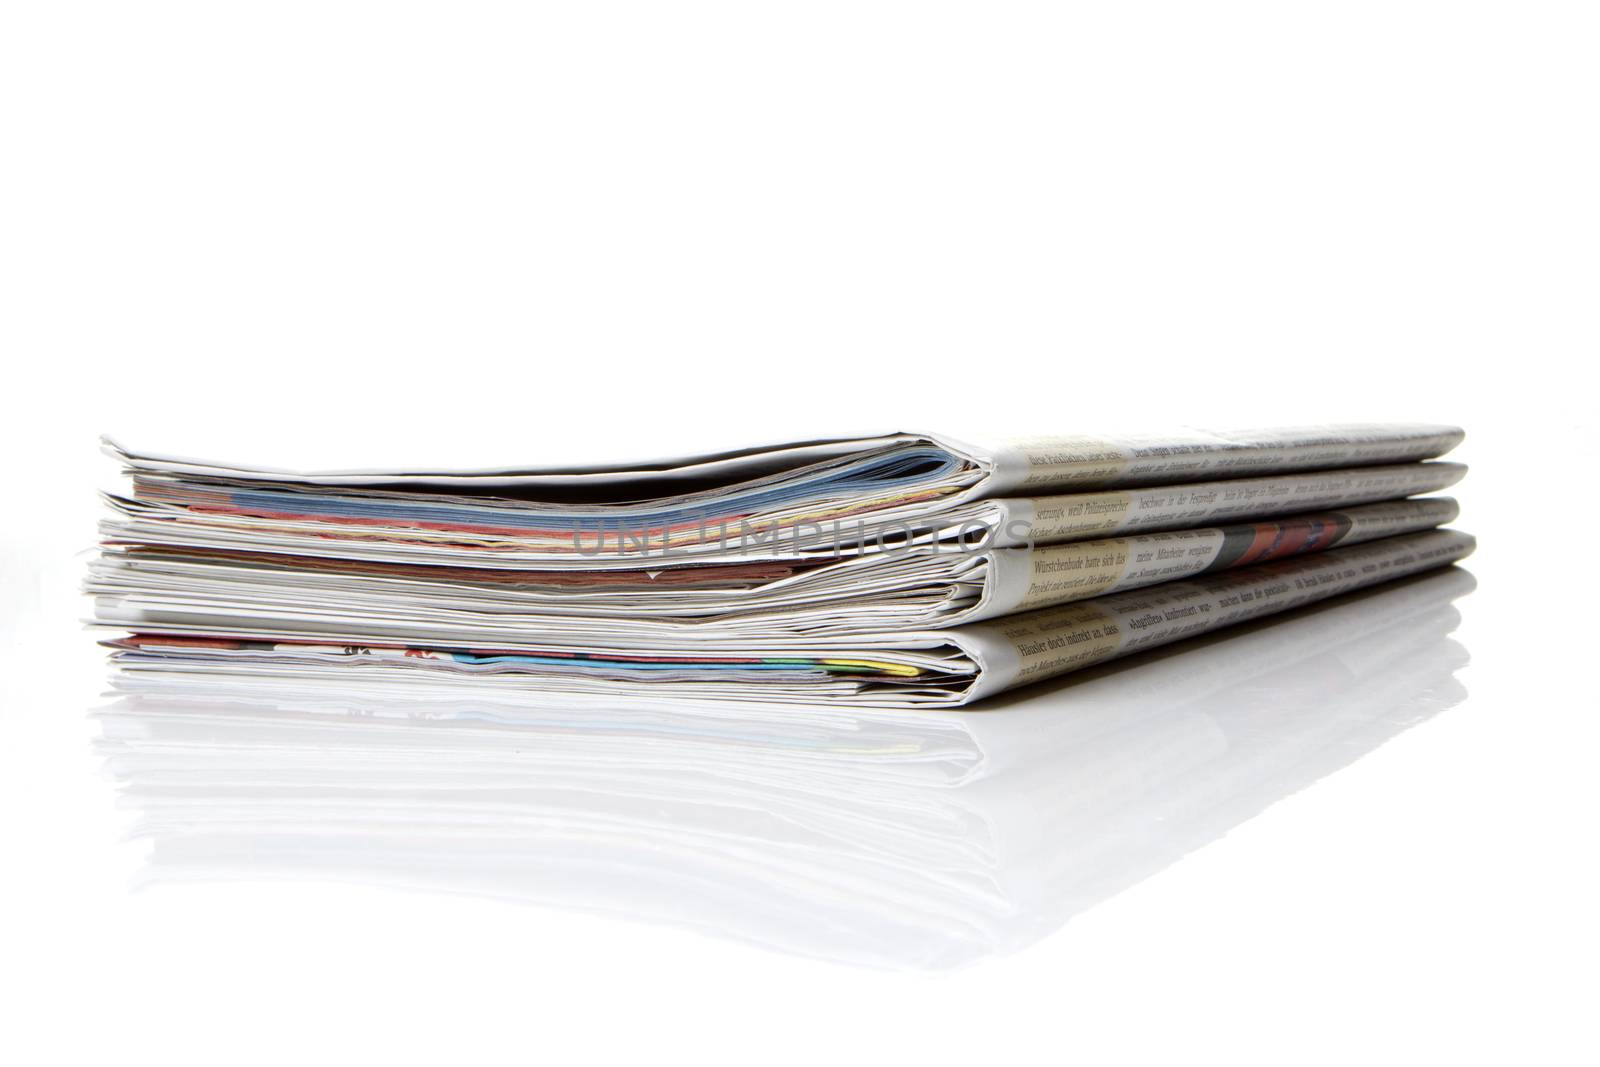 several newspapers, journals stacked on white background